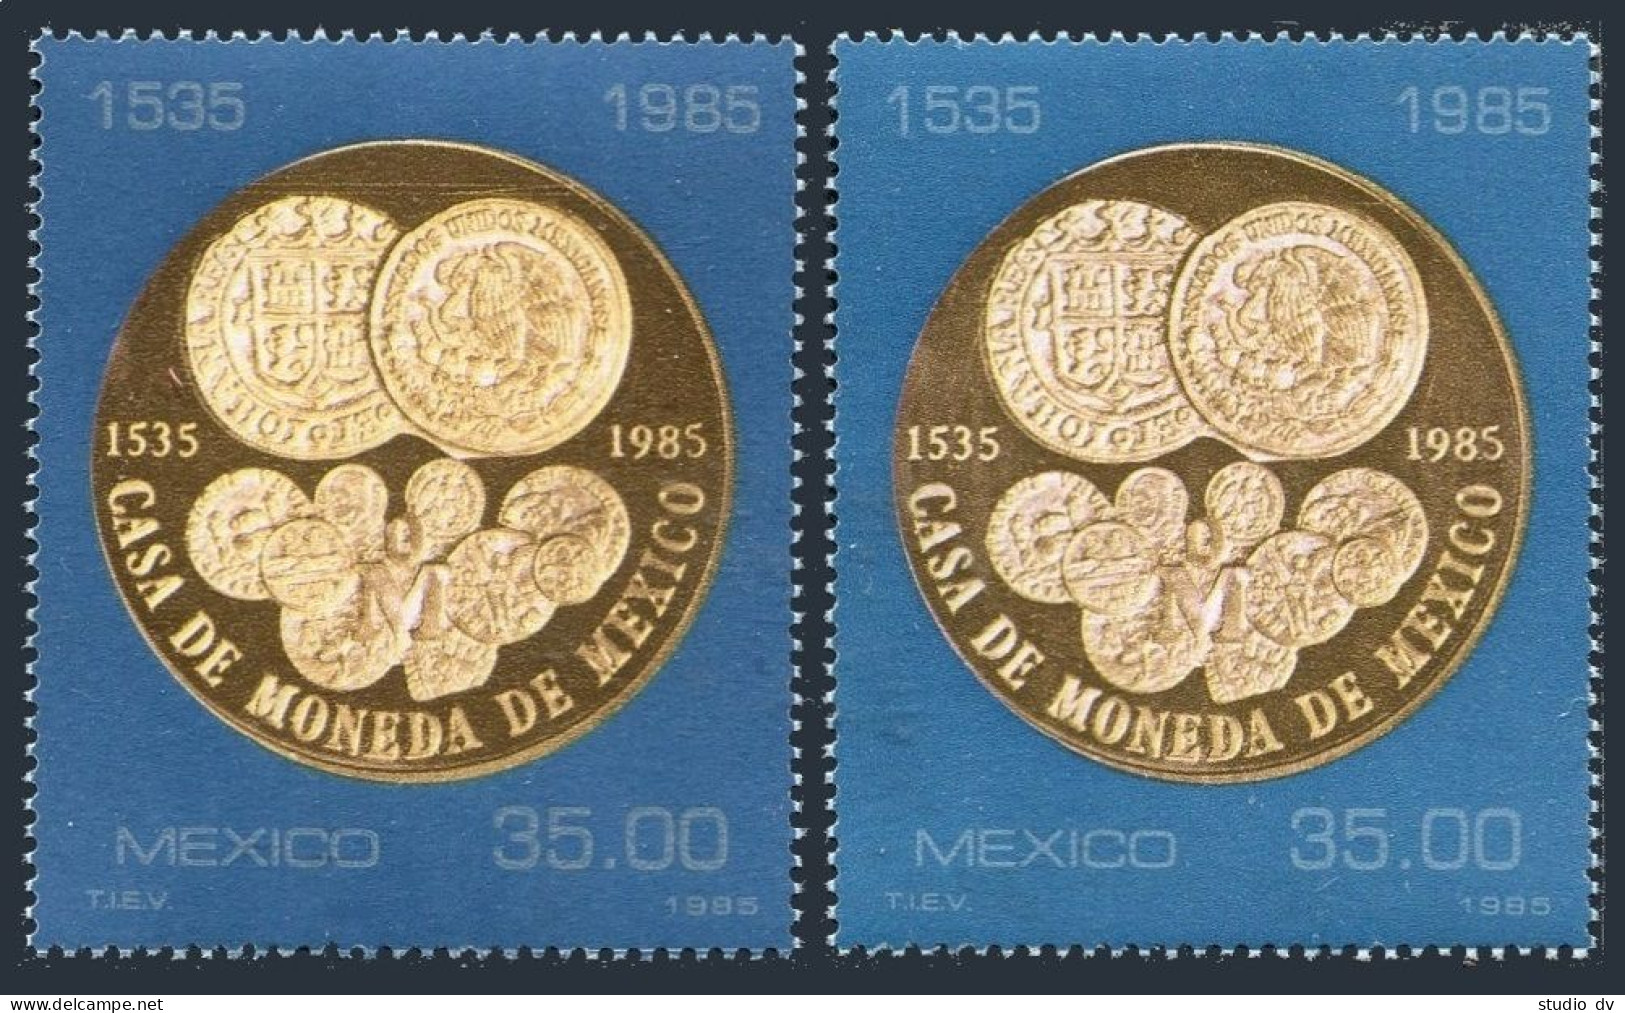 Mexico 1380 2 Varieties,MNH.Mi 1927.Mexican Mint,450,1985.Gold, Copper Coins. - Mexico